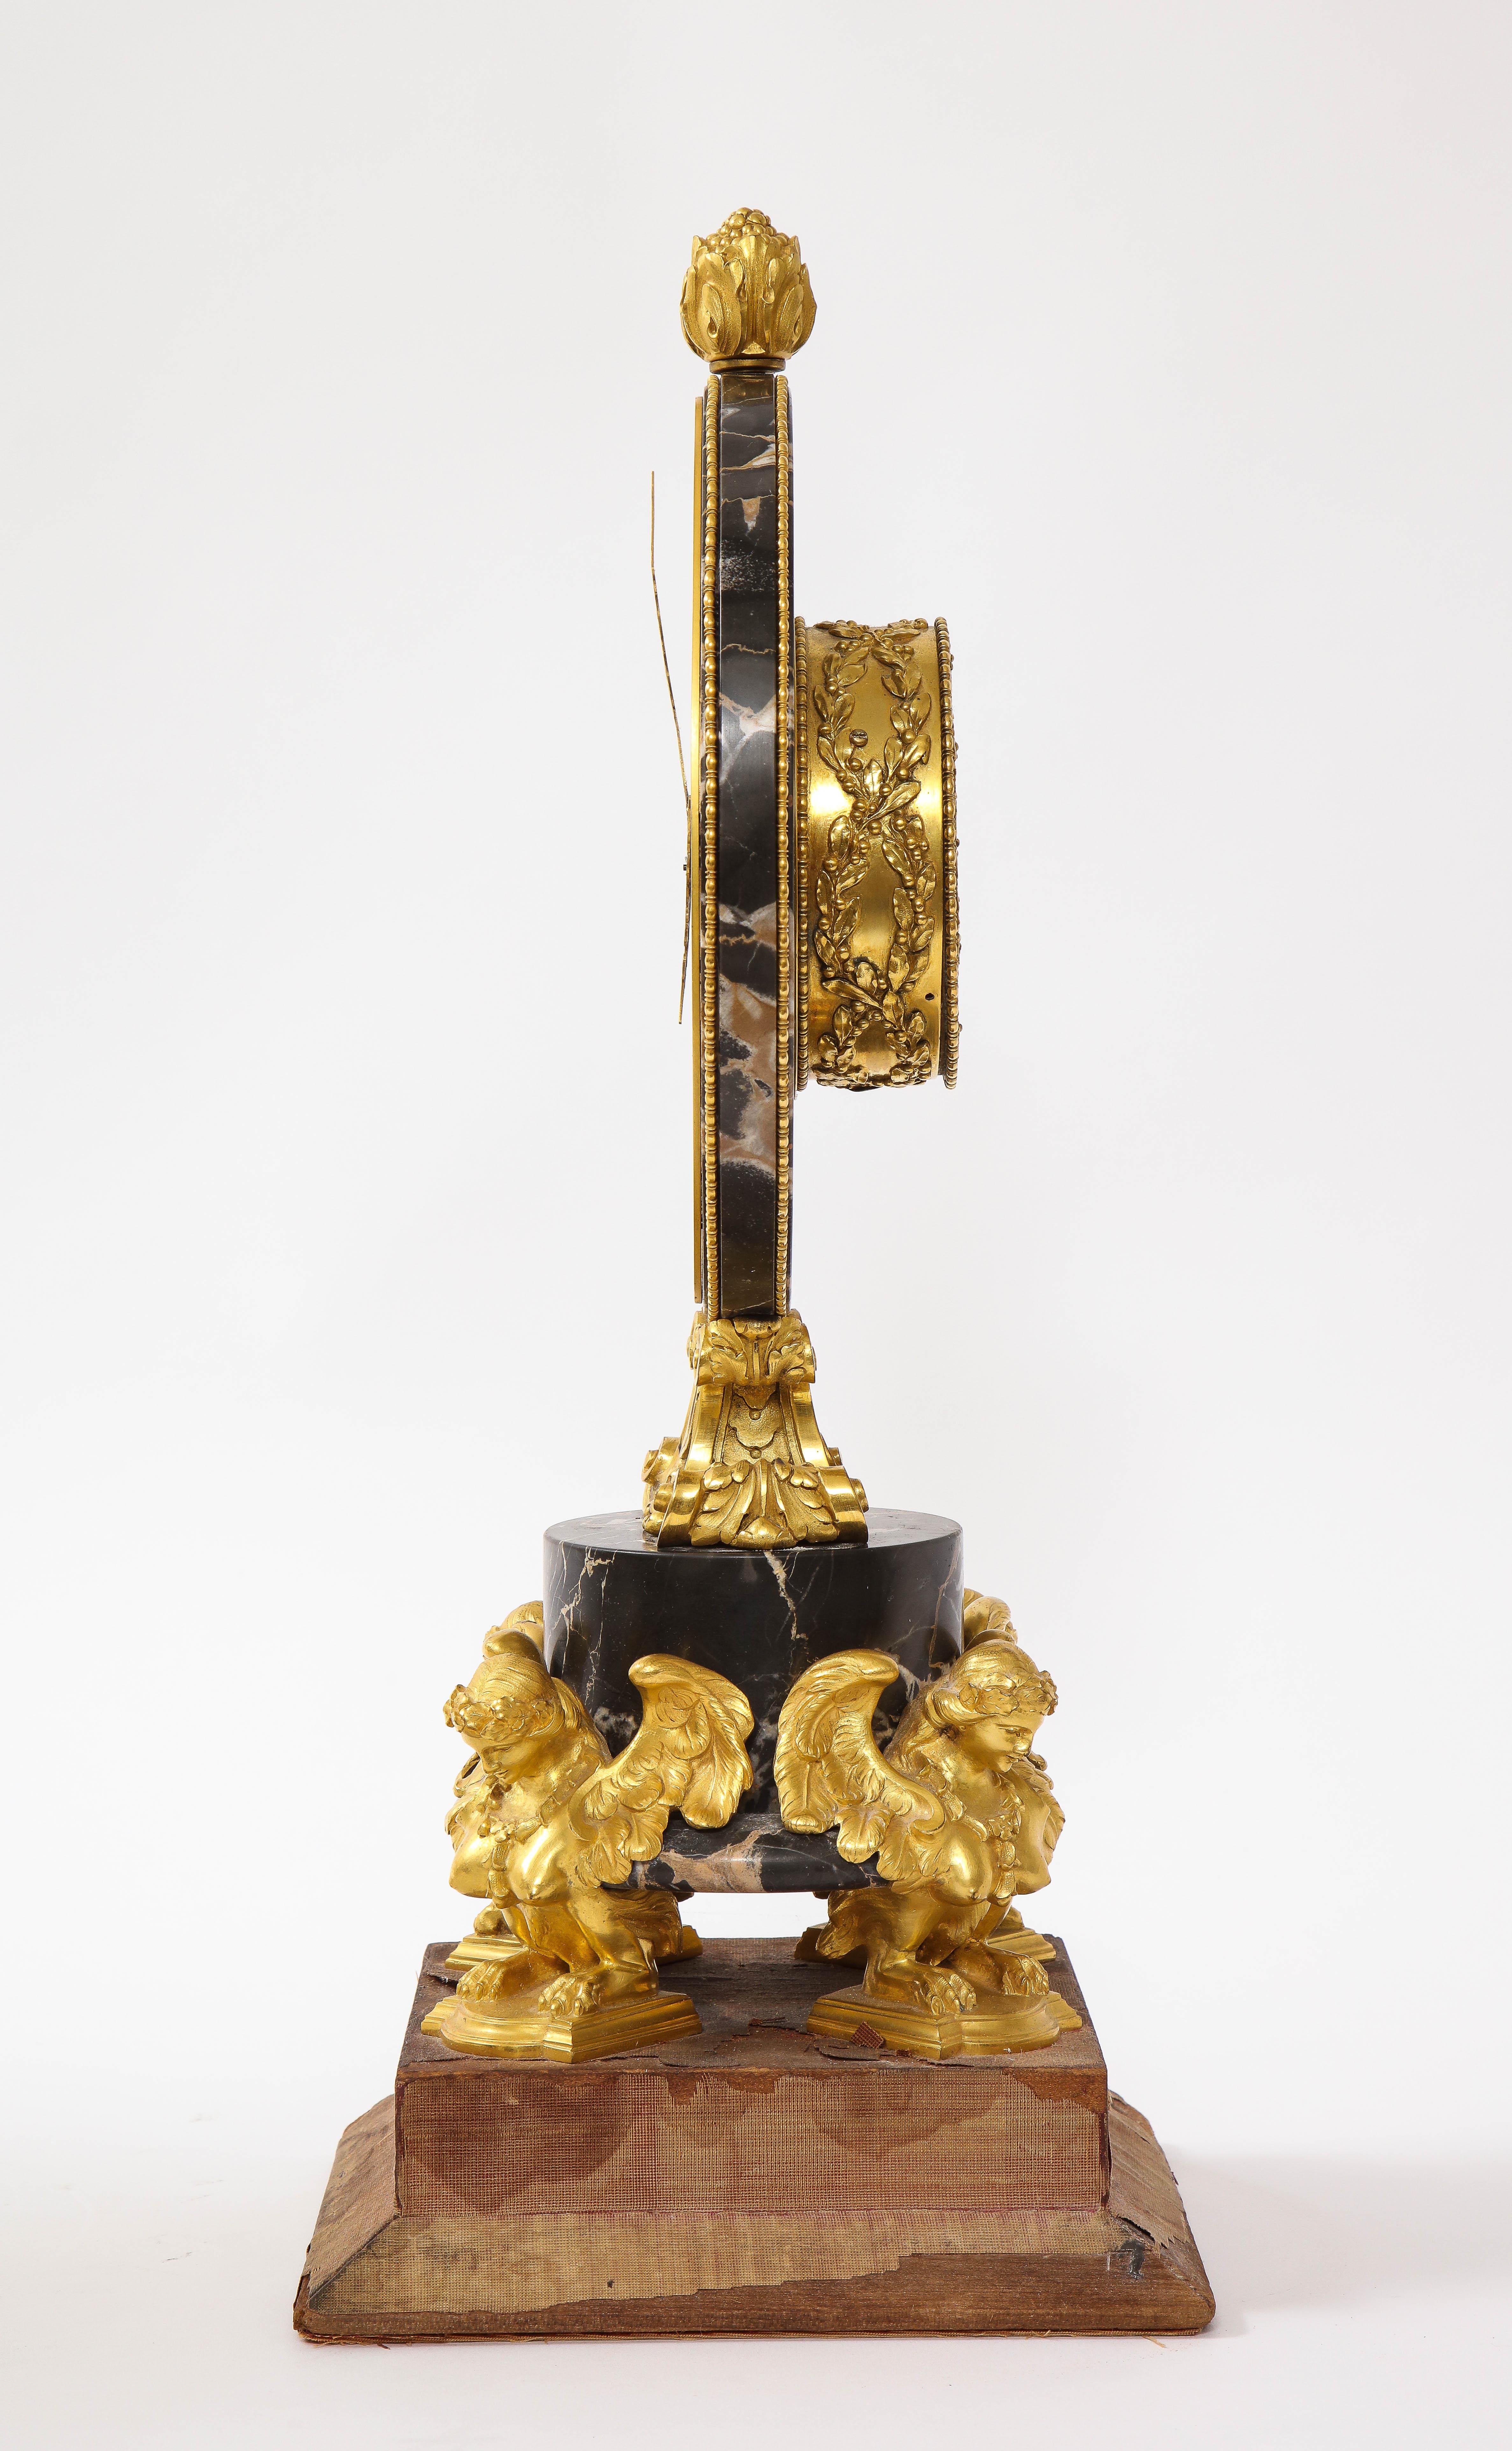 E.F. Caldwell Veined Black Marble and Dore Bronze Mounted Sphinx Legged Clock In Good Condition For Sale In New York, NY